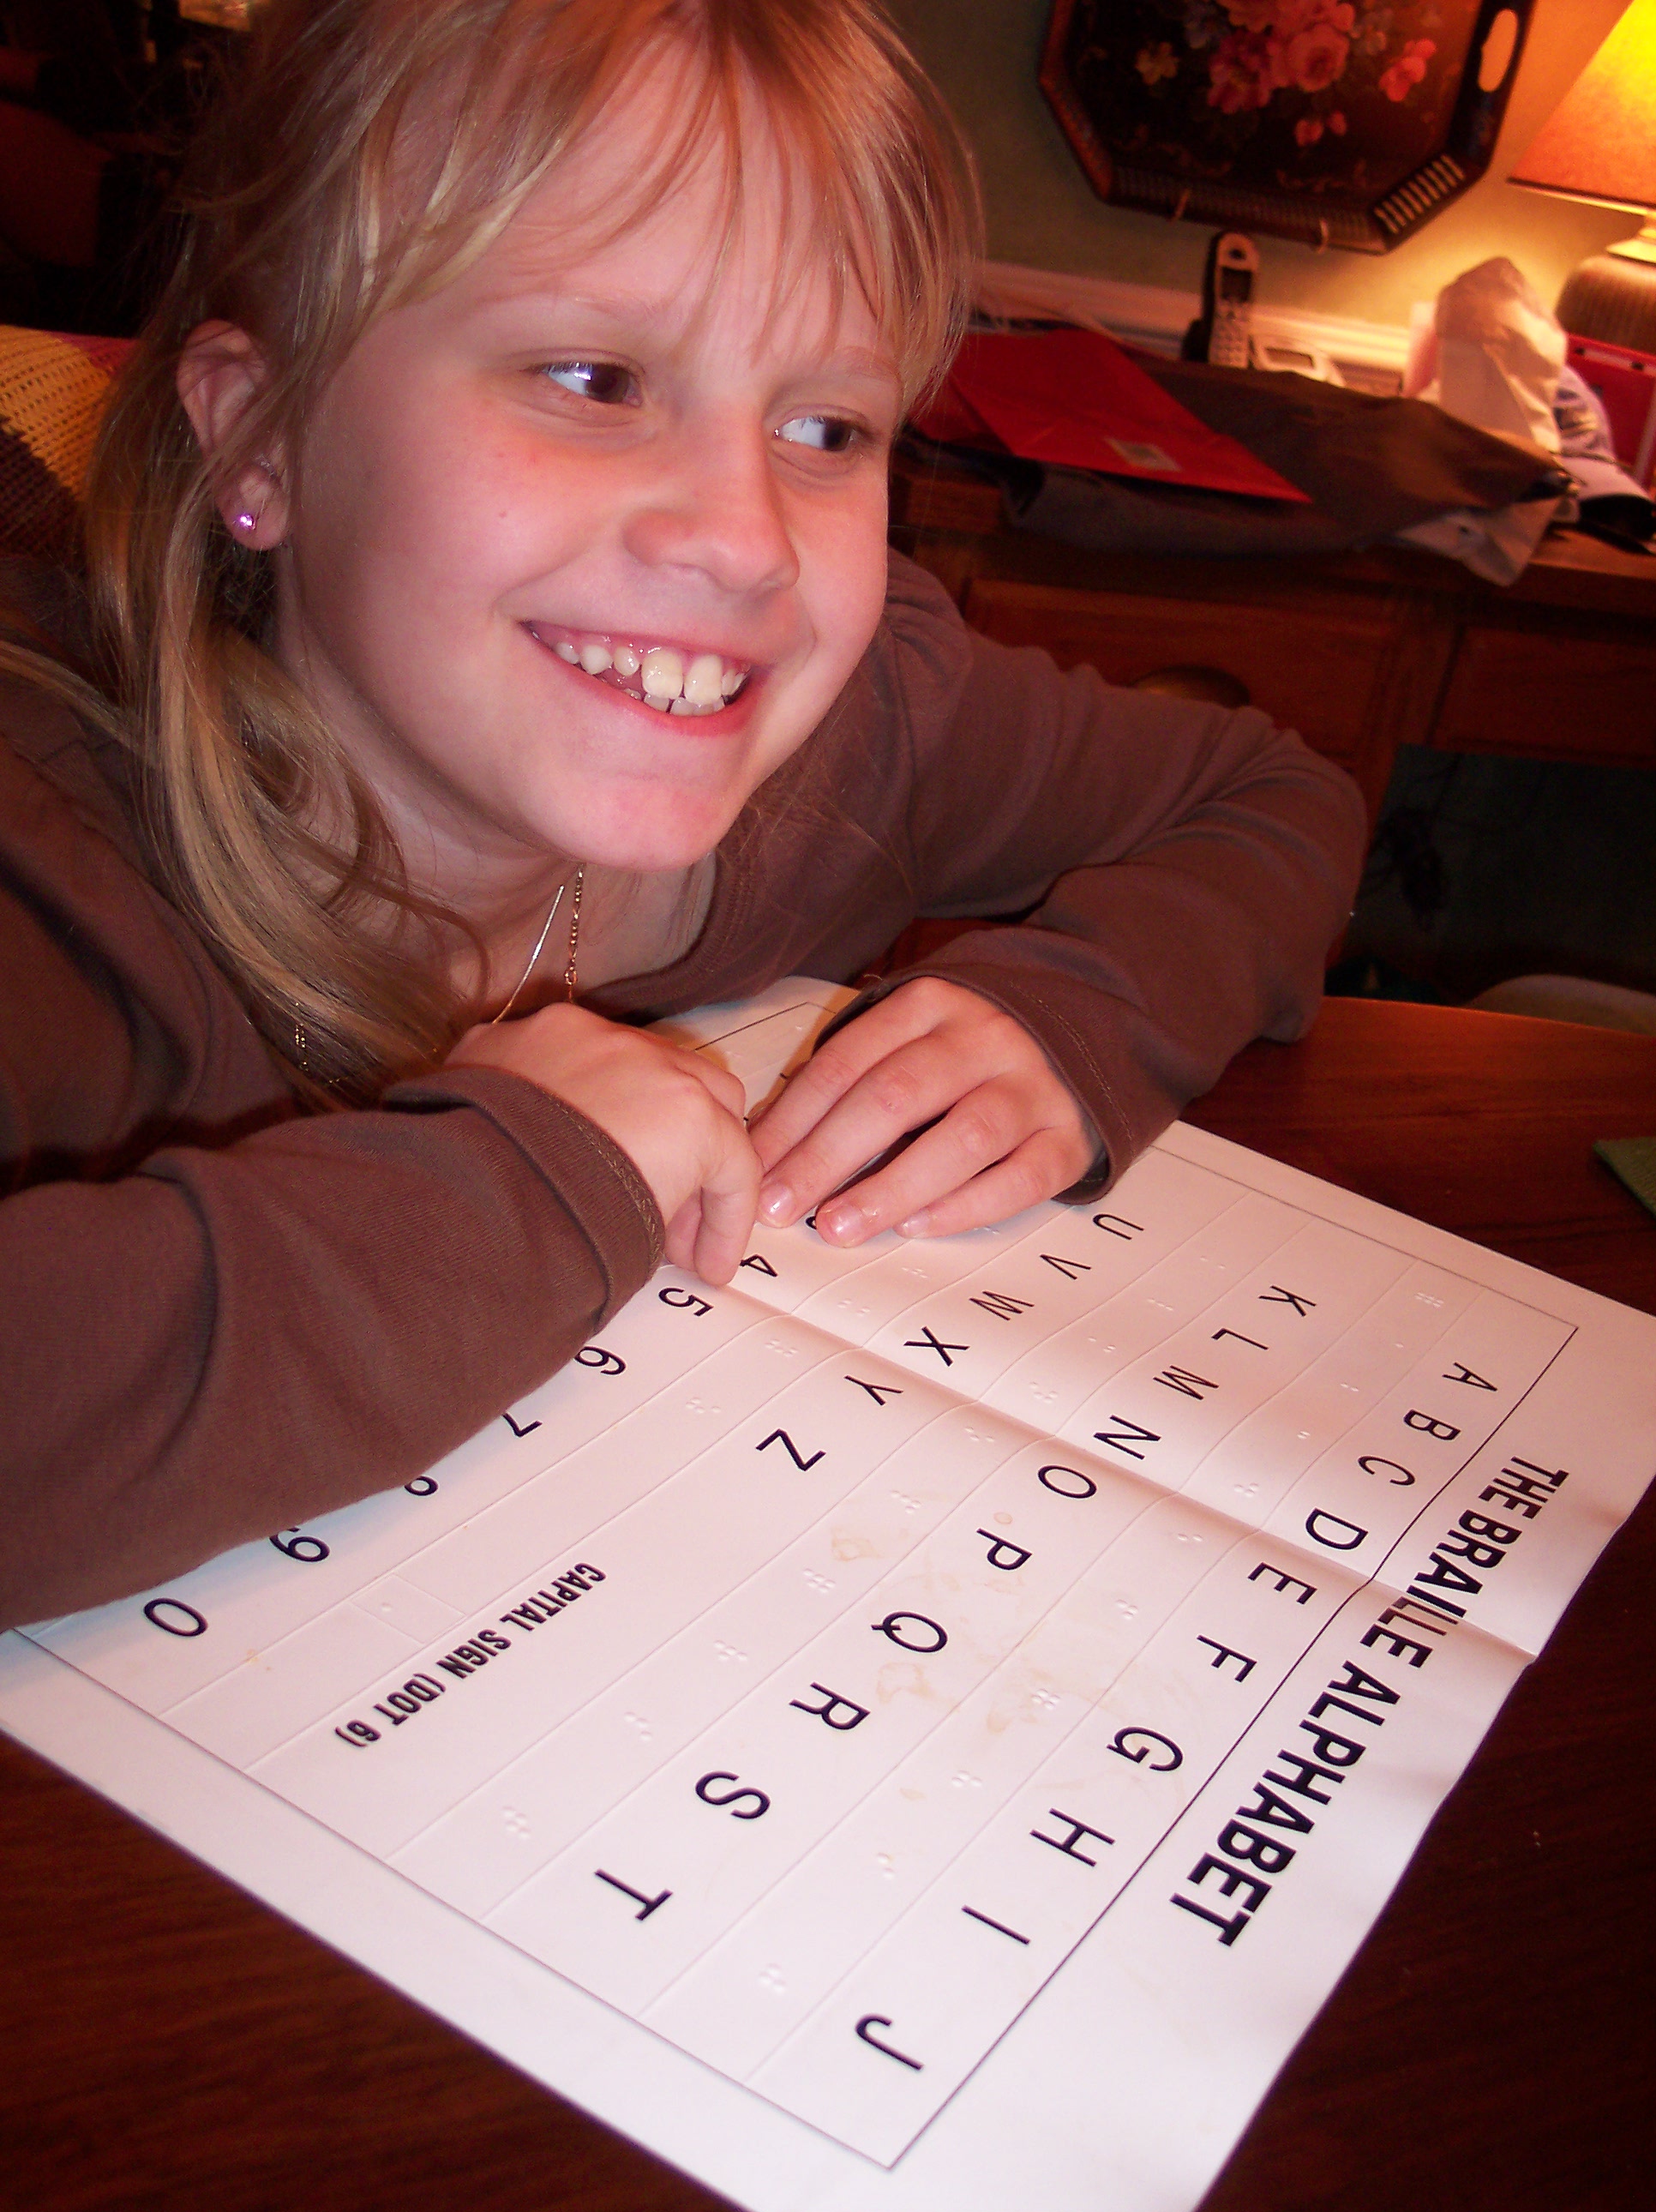 Taylor with Braille placemat